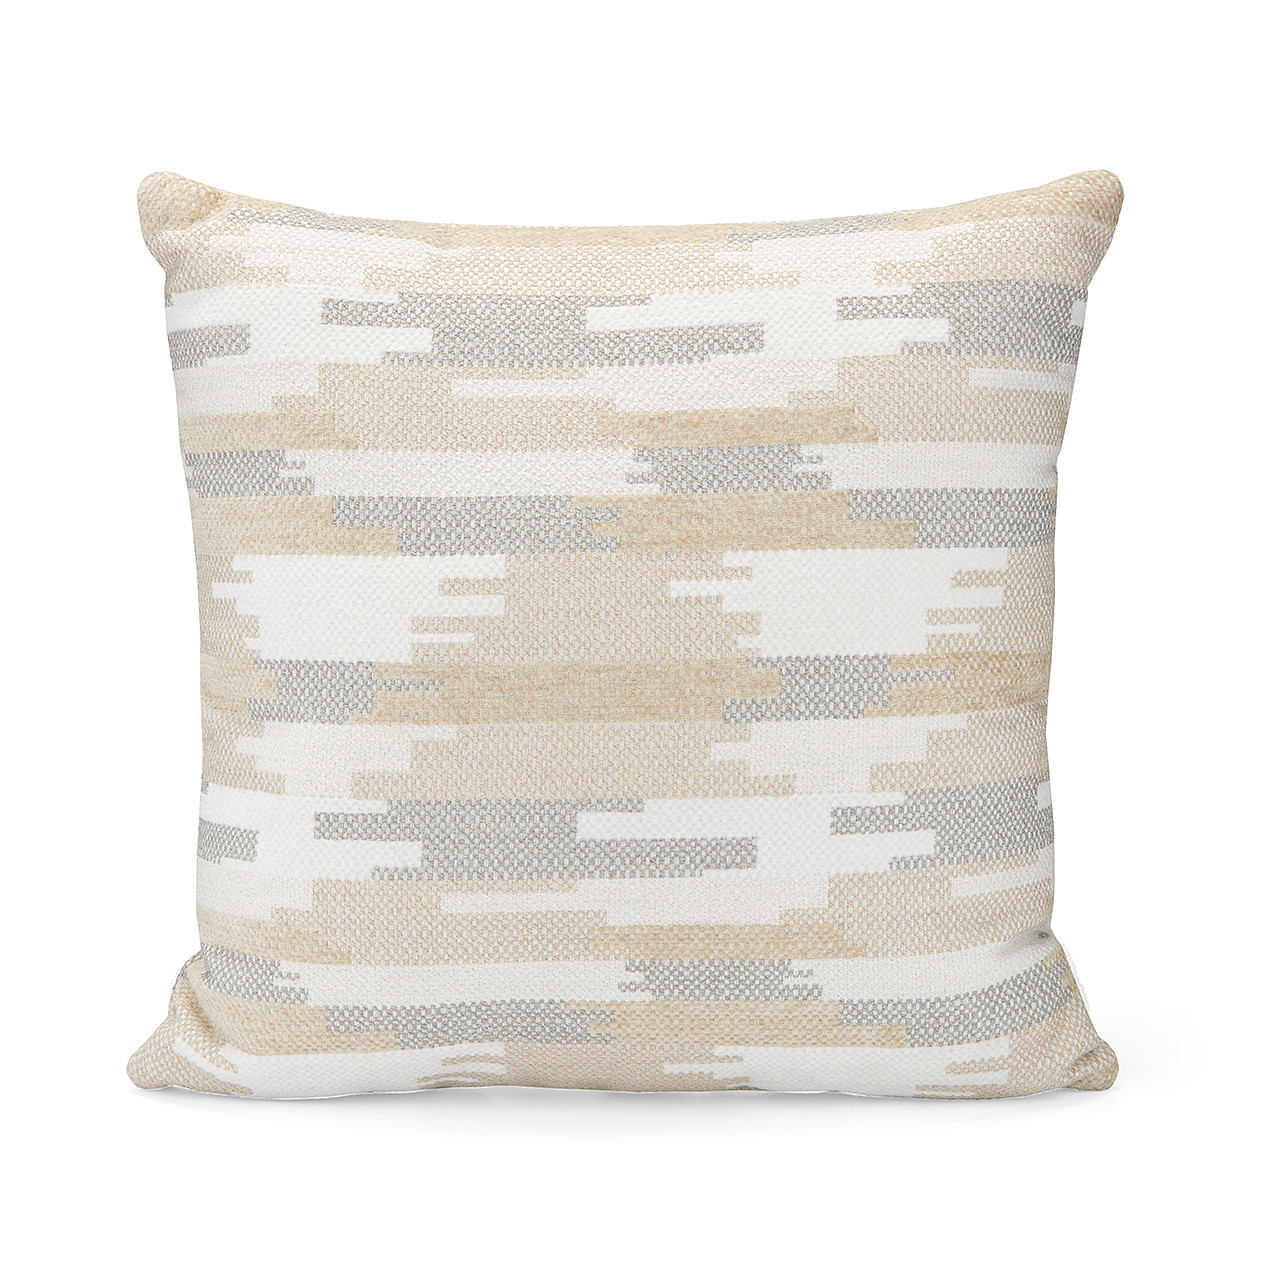 Oyster Leisure 18 x 18 in. Pillow